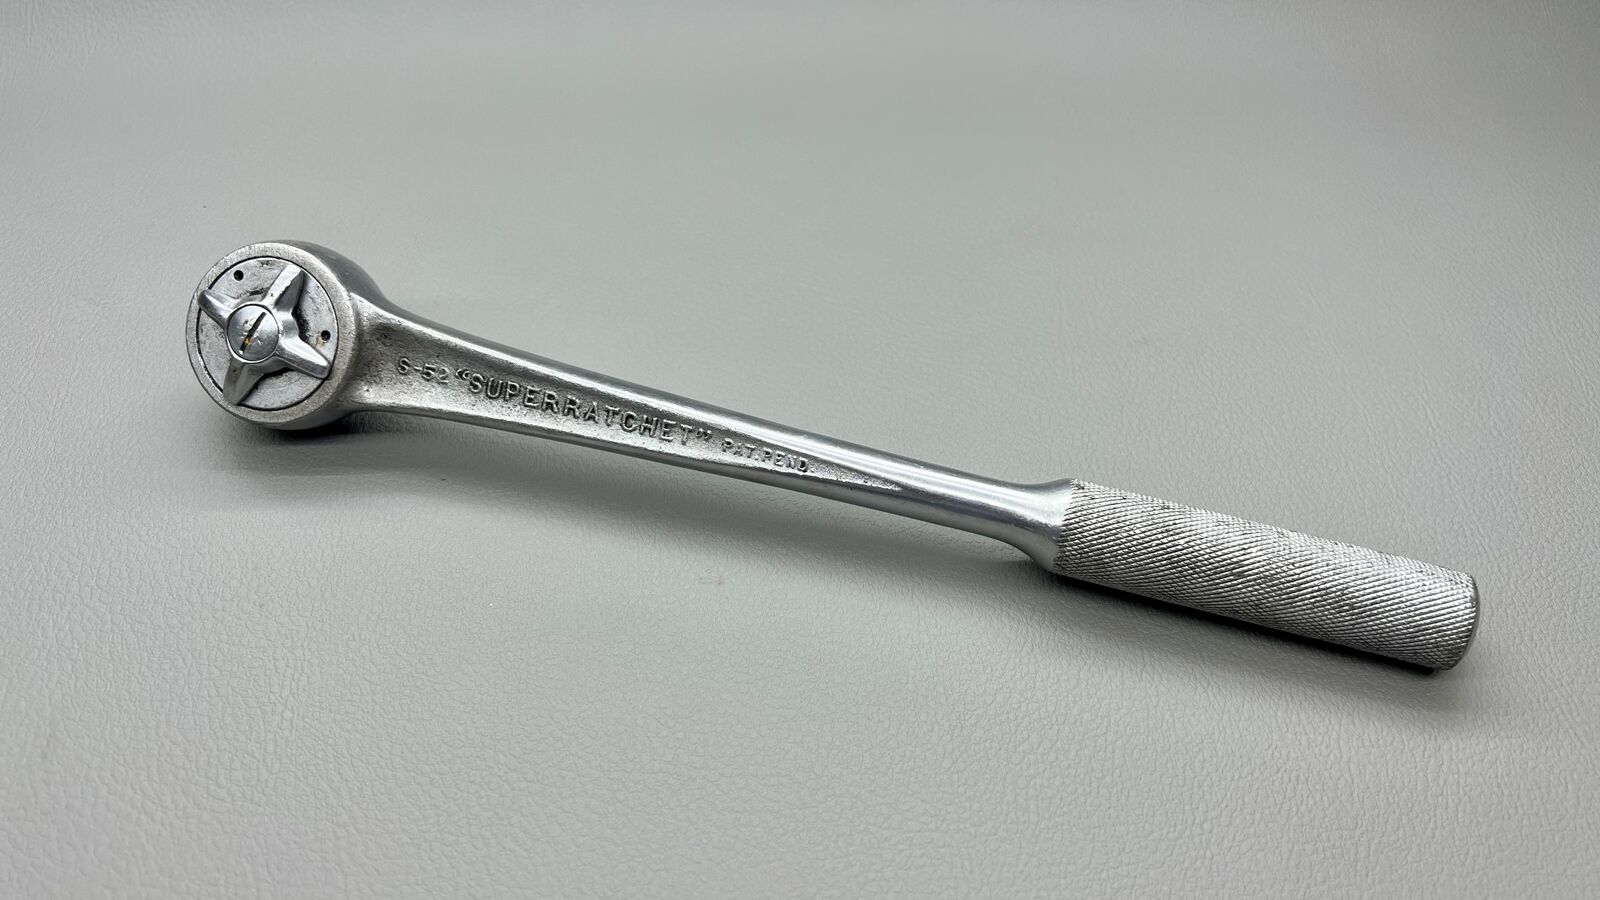 J H Williams USA S-52 Super Ratchet 1/2″ Drive Nice Tight Movement On This Quality Tool